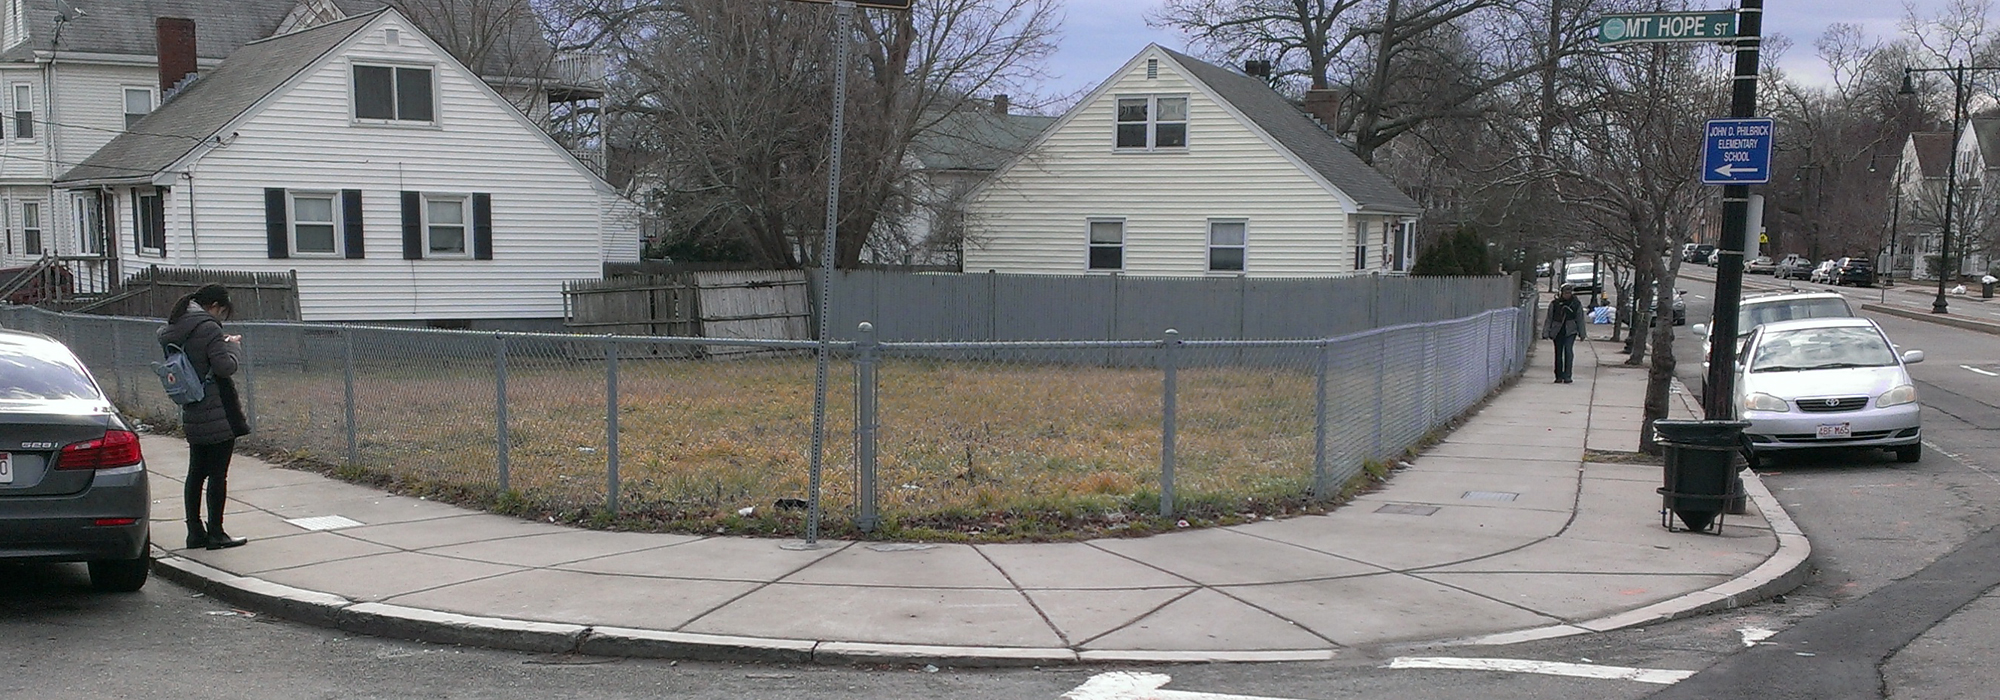 Image for a photo of the mount hope street parcel in roslindale